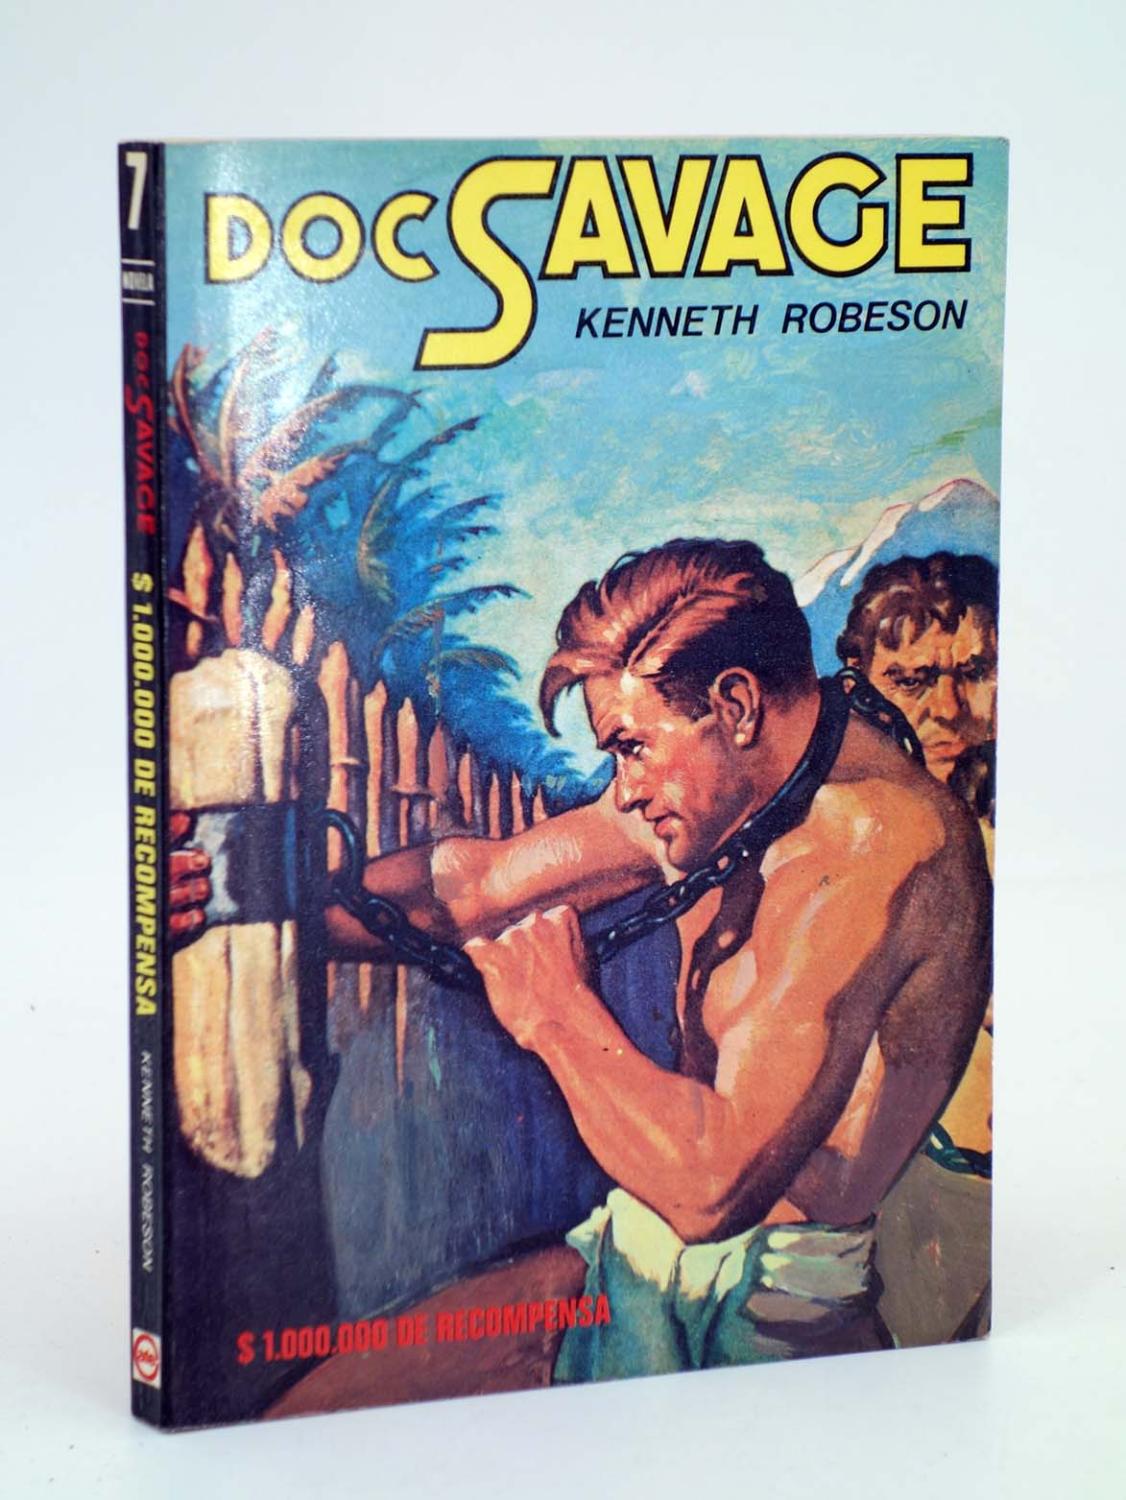 DOC SAVAGE 7. 1.000.000 $ DE RECOMPENSA (Kenneth Robeson) CATE, 1982 - Kenneth Robeson